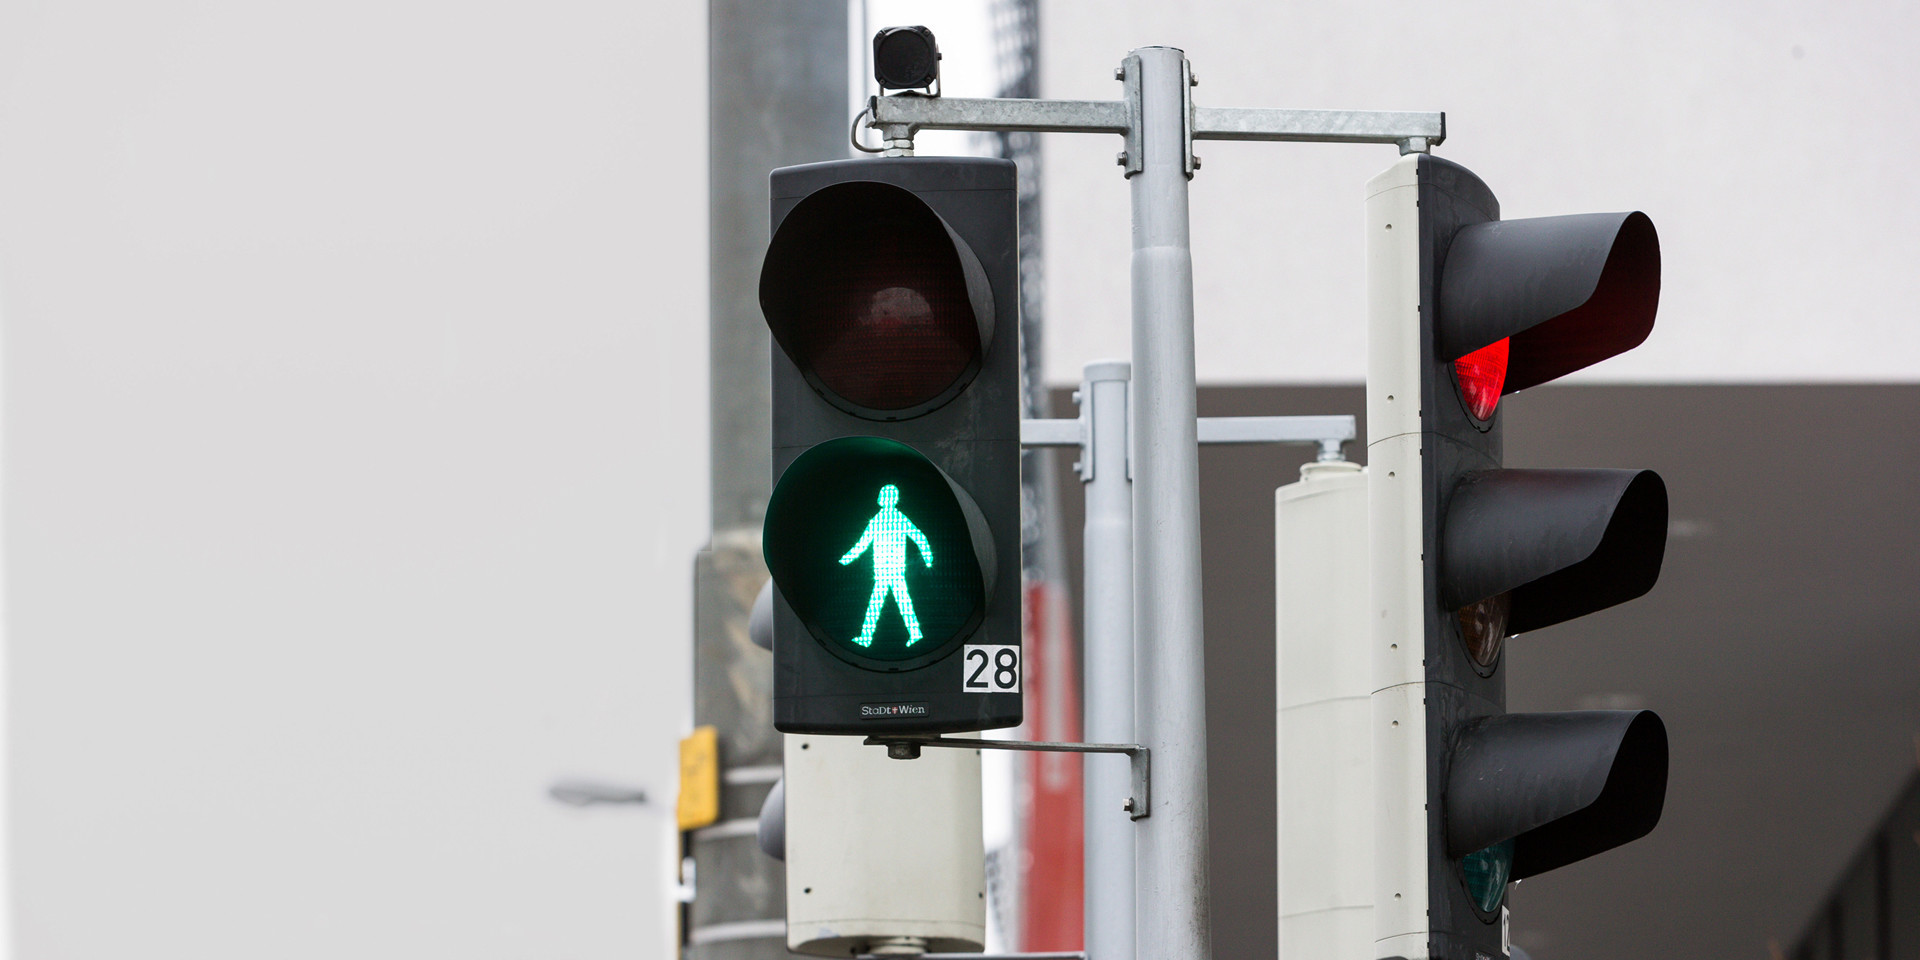 vienna-will-install-smart-traffic-lights-that-will-recognise-when-pedestrians-want-to-cross-the-street